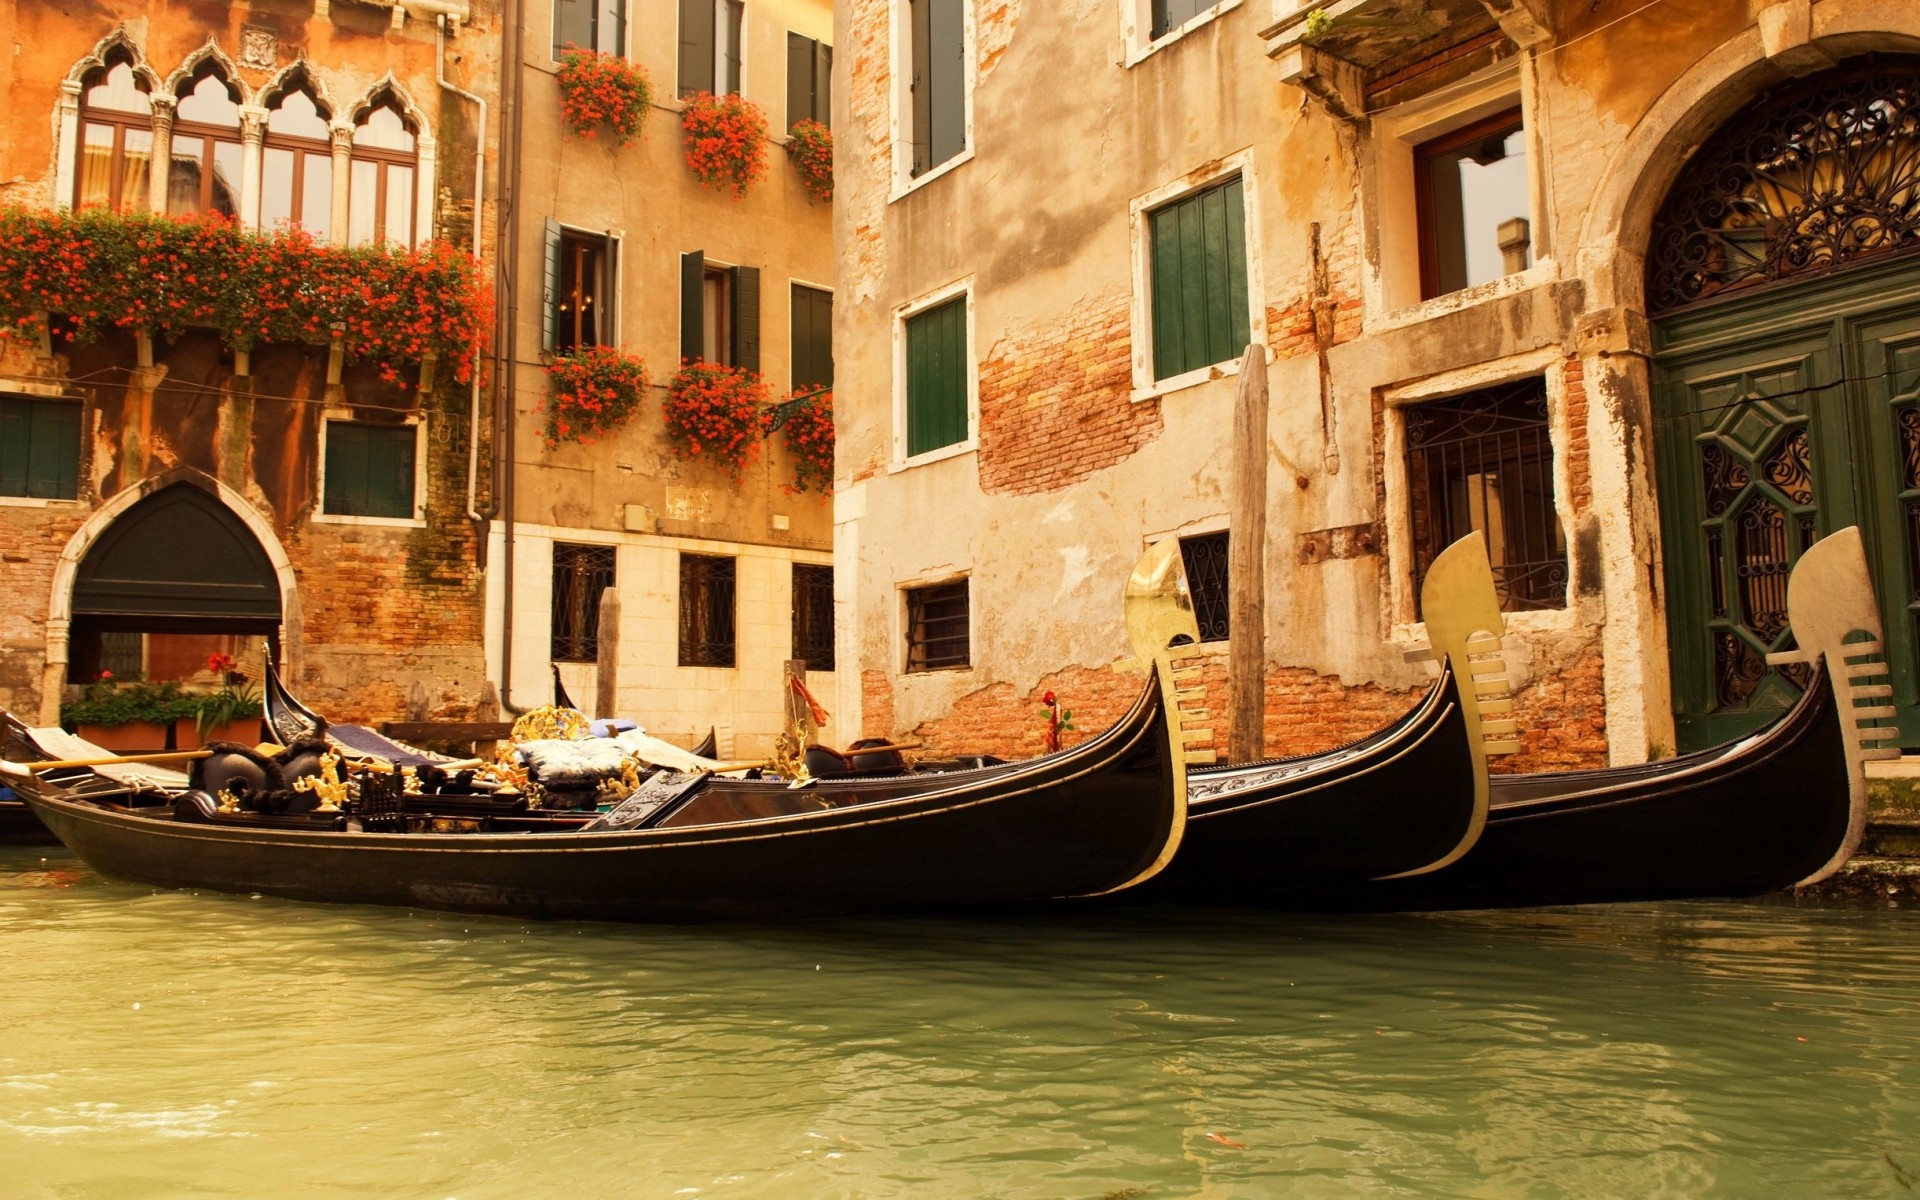 Gondola: A long narrow vessel used in the canals of Venice, Italy. 1920x1200 HD Background.